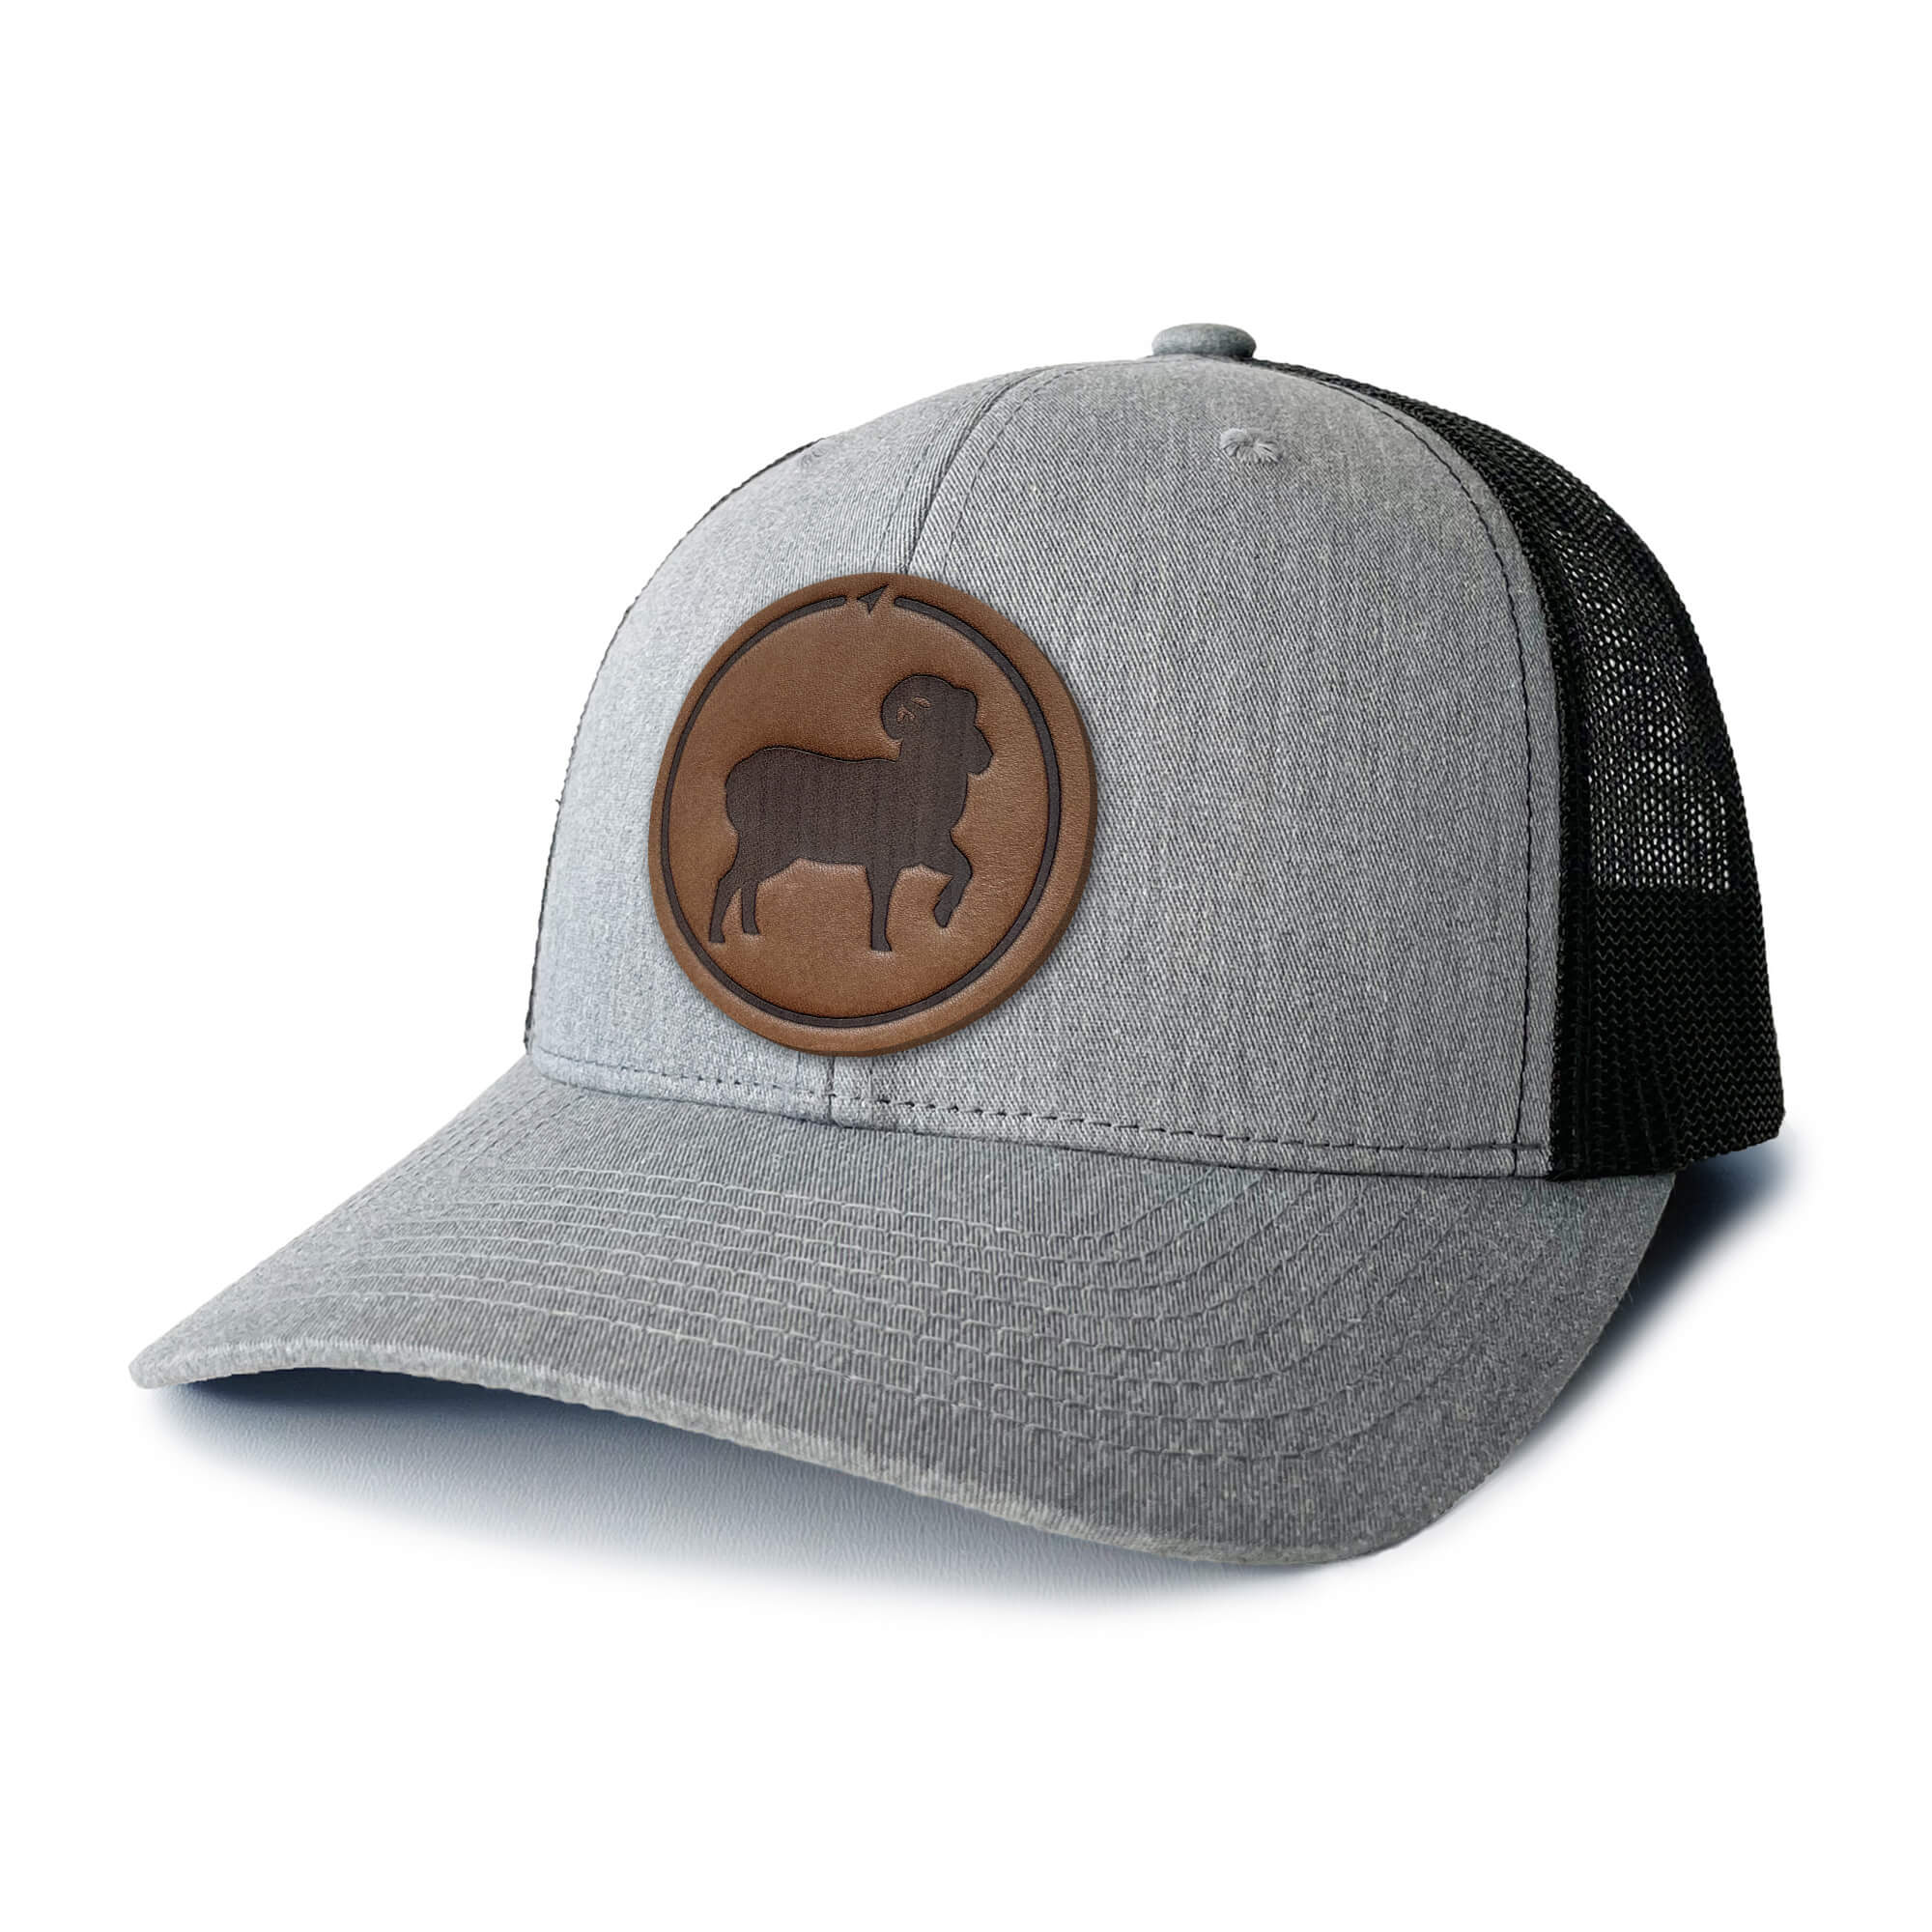 Heather grey and white trucker hat with full-grain leather patch of a Bighorn Sheep | BLACK-004-002, CHARC-004-002, NAVY-004-002, HGREY-004-002, MOSS-004-002, BROWN-004-002